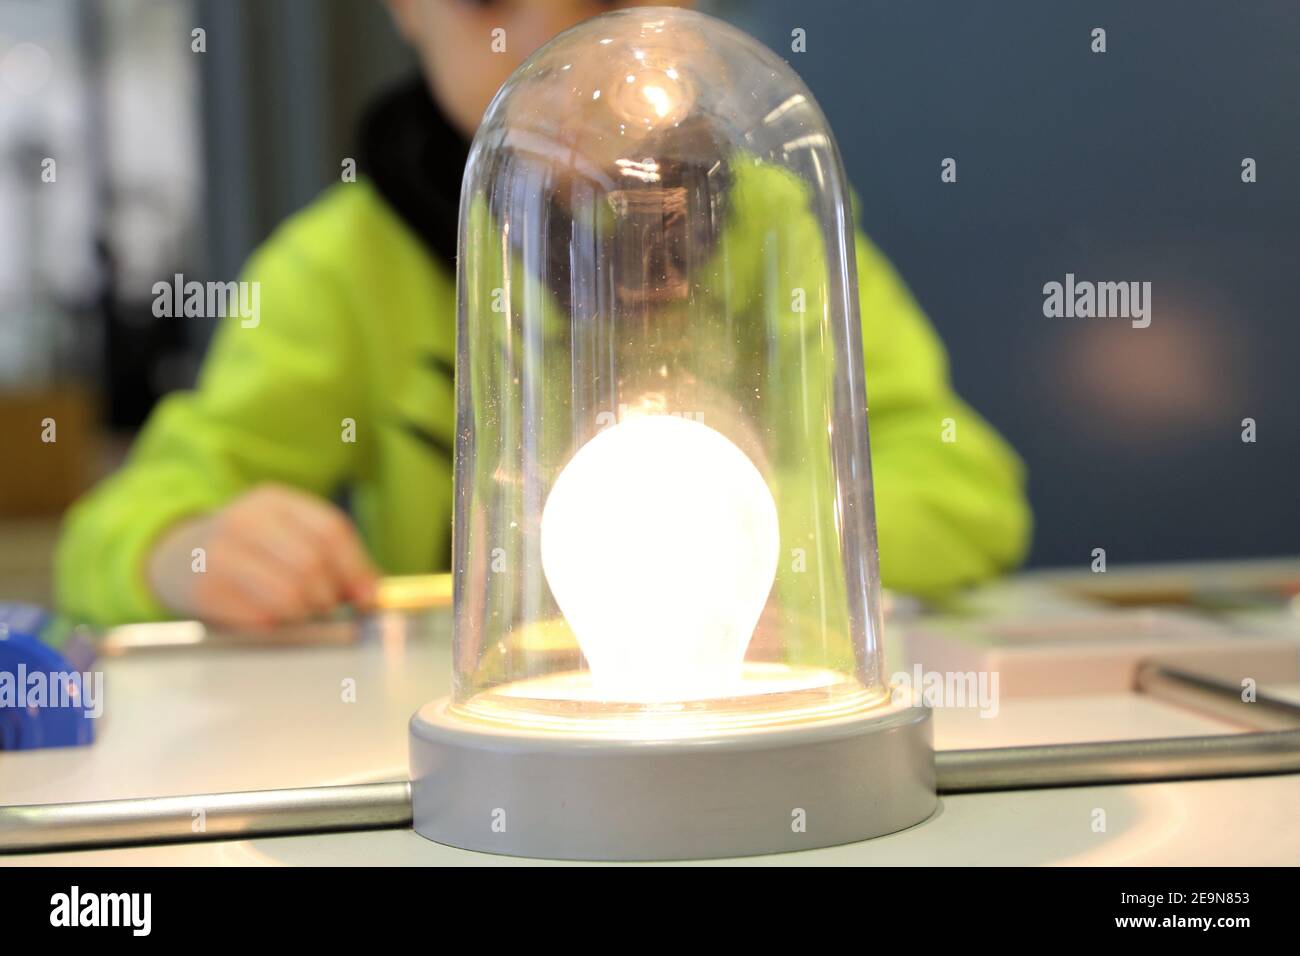 Electricity project for kids with simple circuit Stock Photo